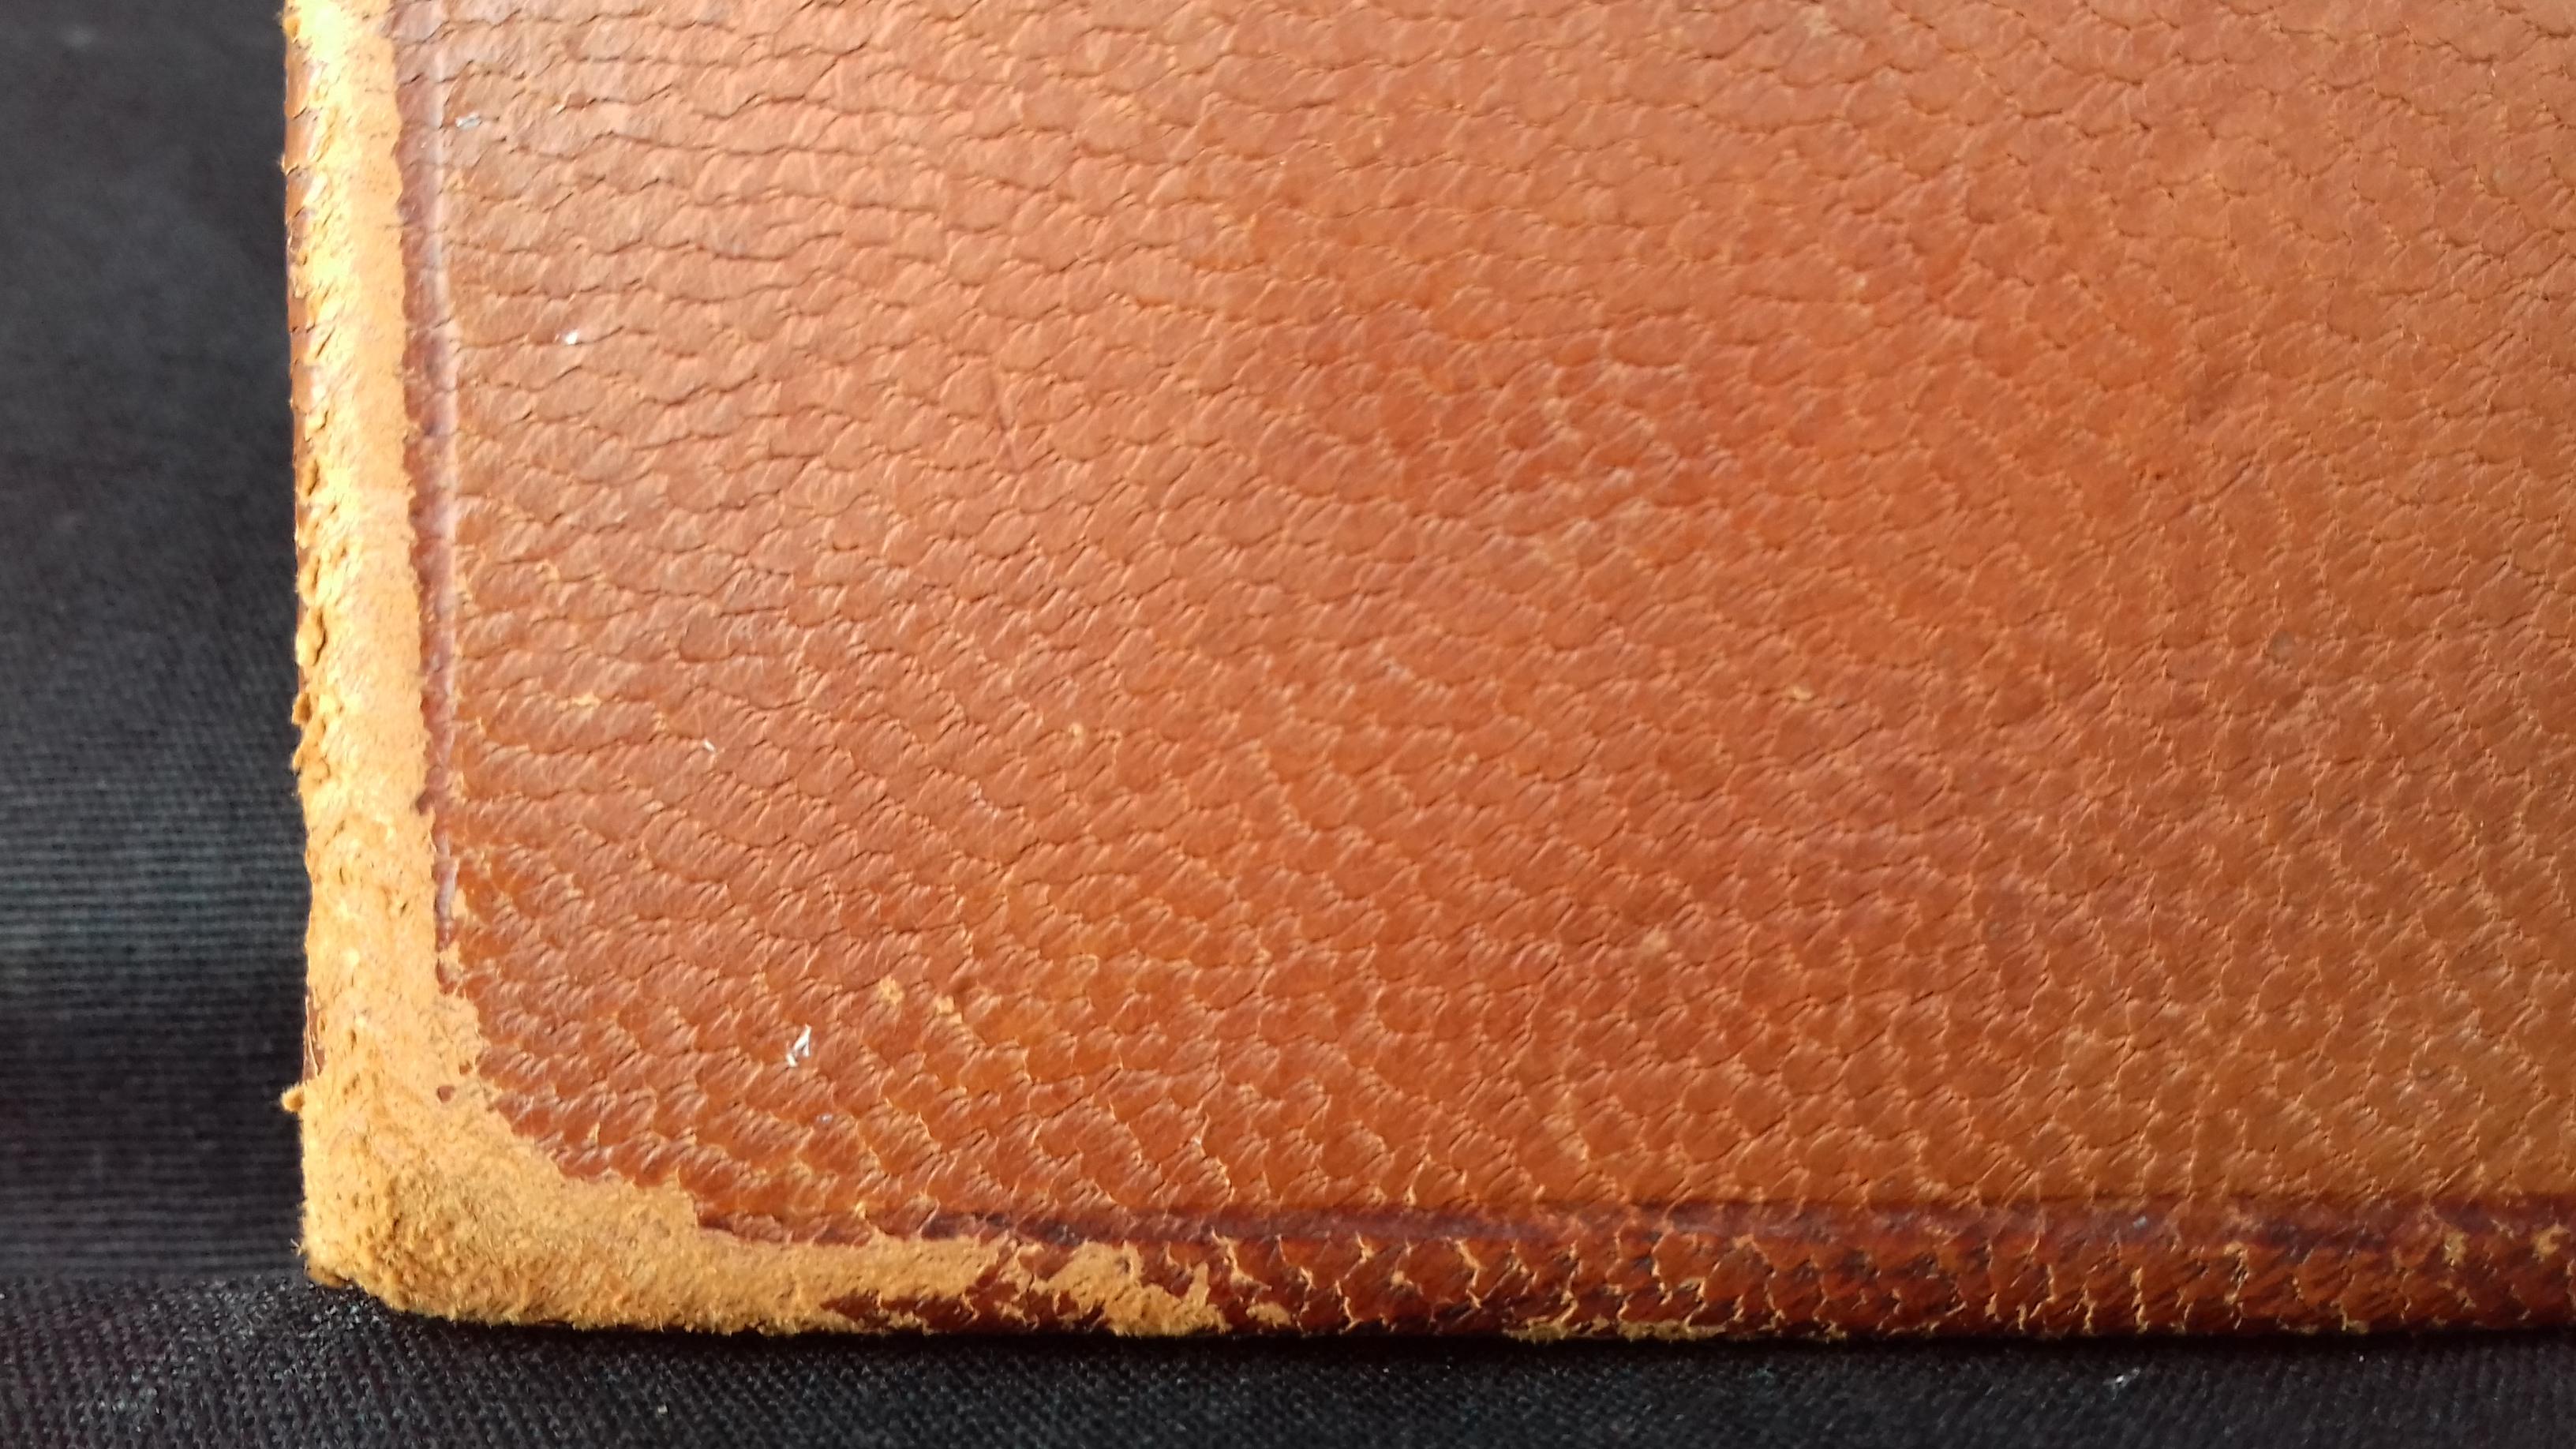 Exceptional Hermès and Paul Jouve Leather Portfolio with Knocker Medor For Sale 15